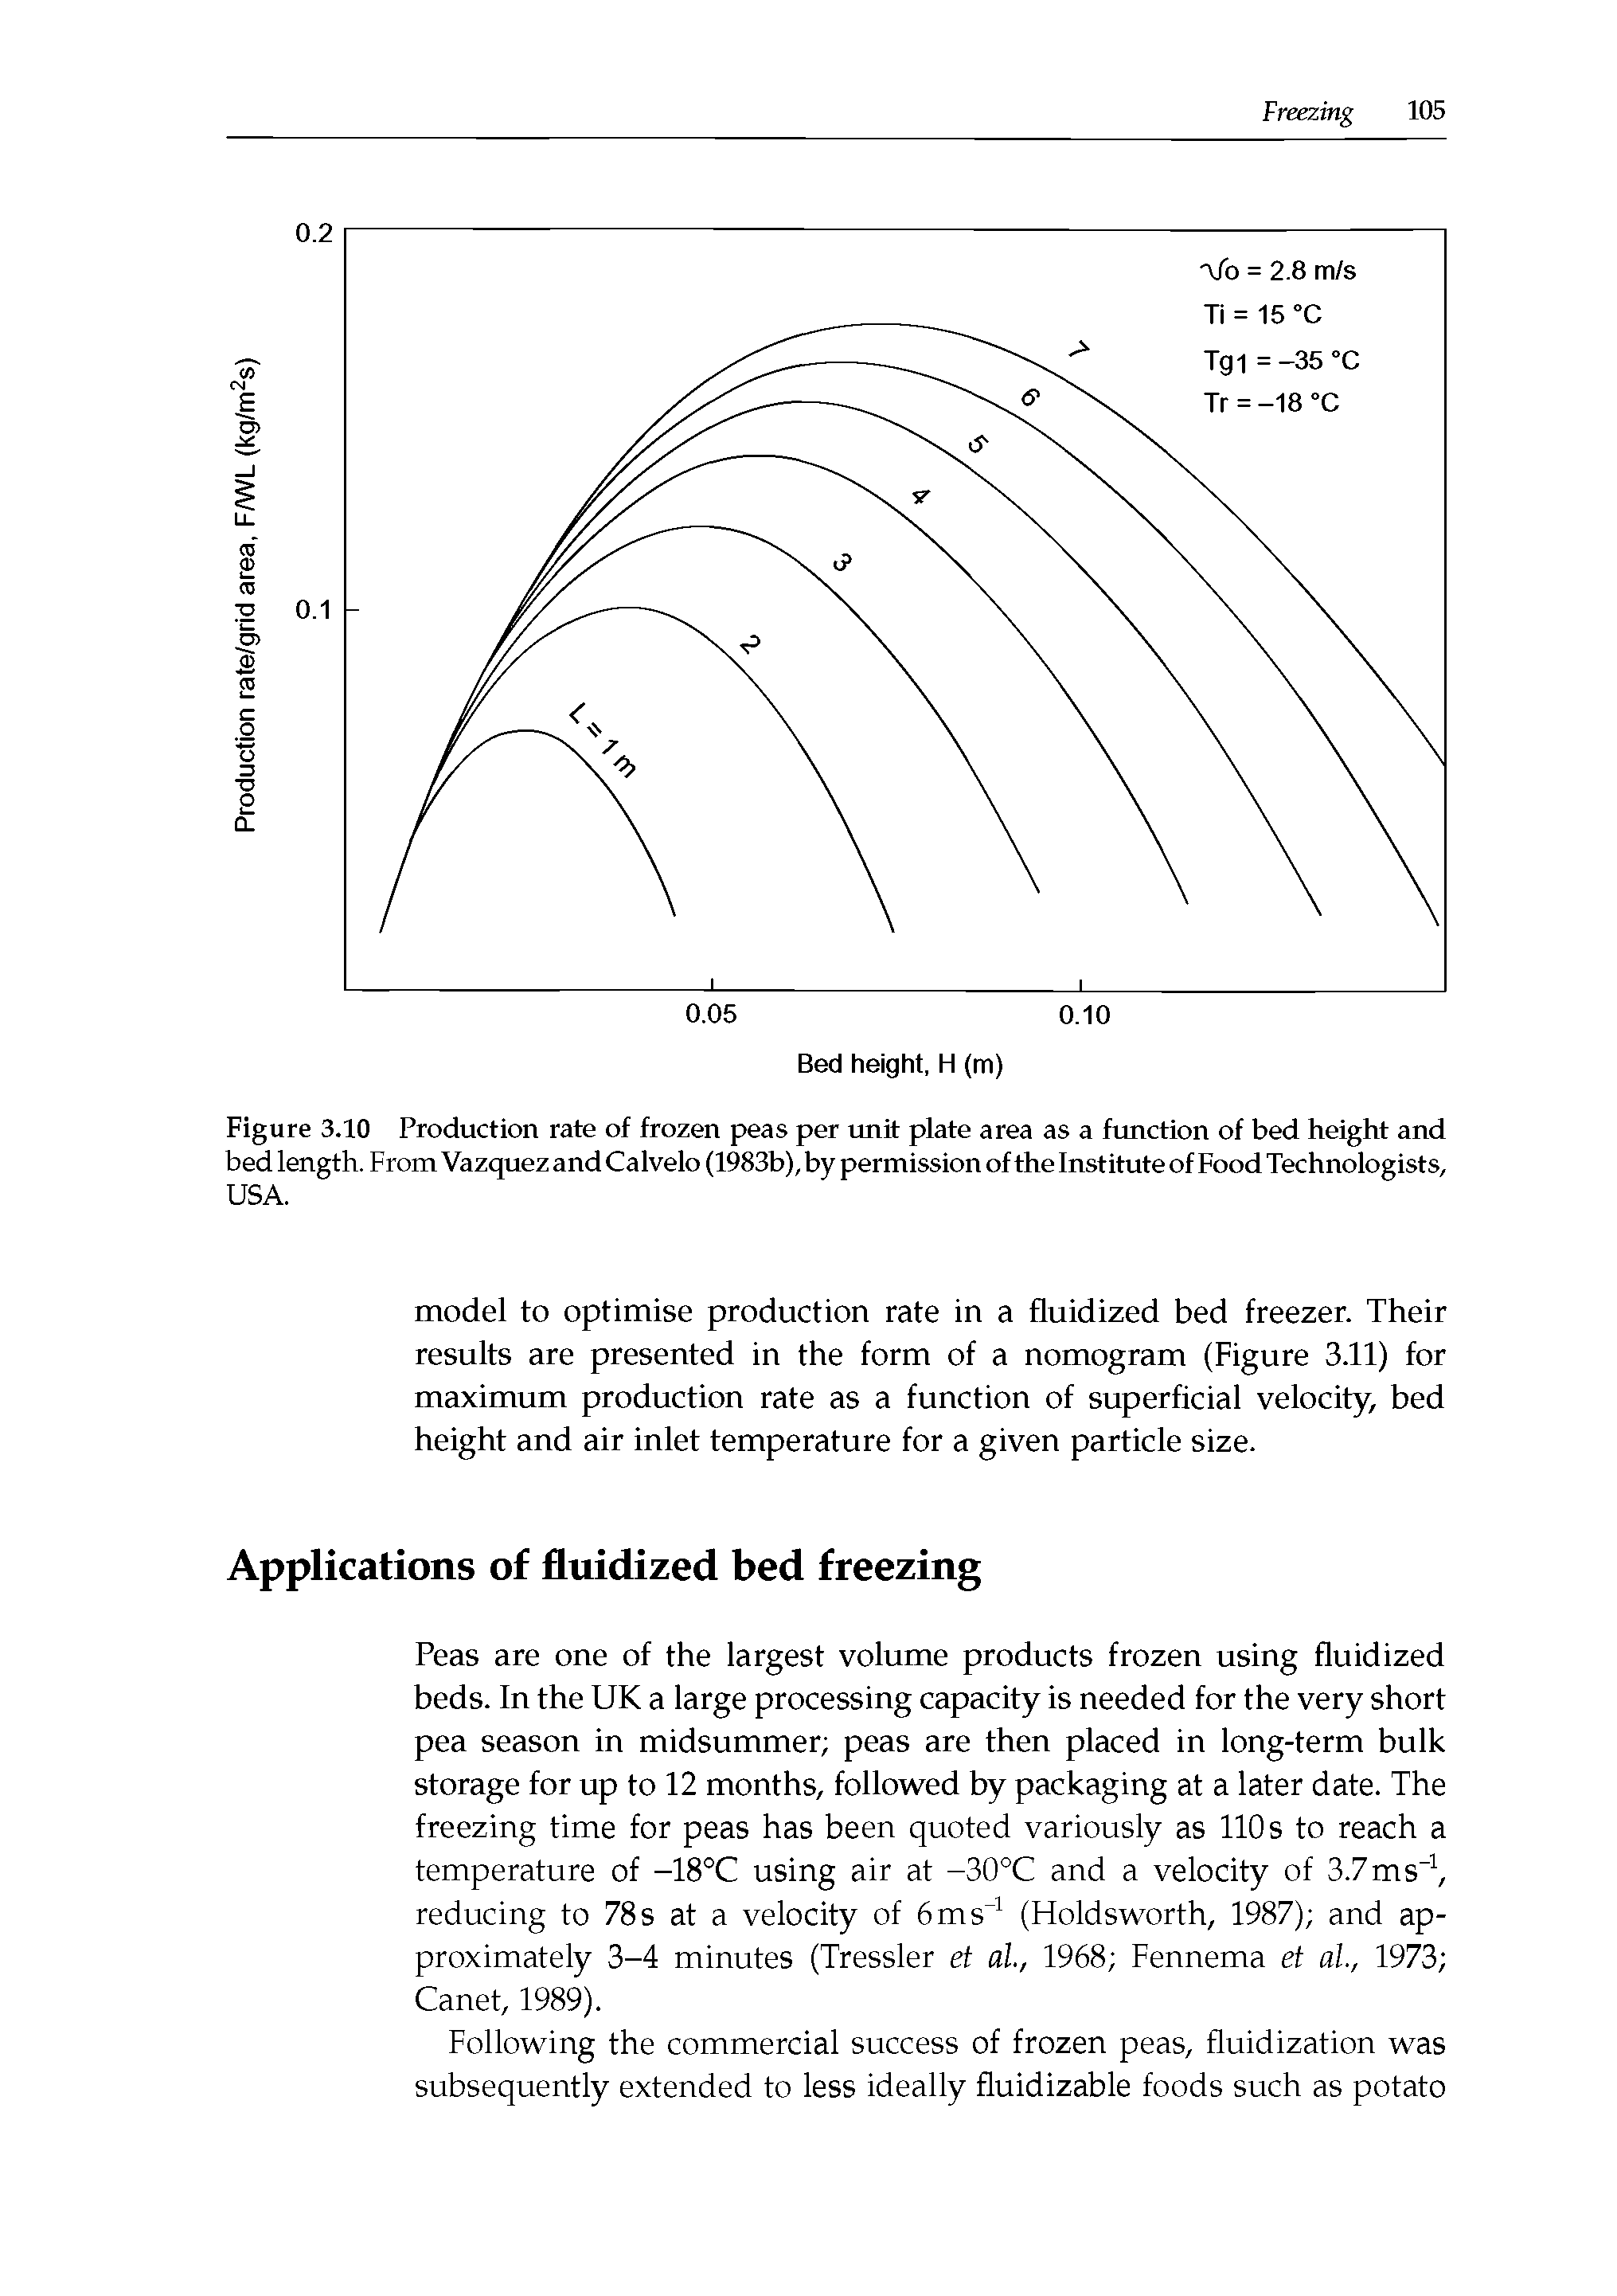 Figure 3.10 Production rate of frozen peas per unit plate area as a function of bed height and bed length. From Vazquez and Calvelo (1983b), by permission of the Institute of Food Technologists, USA.